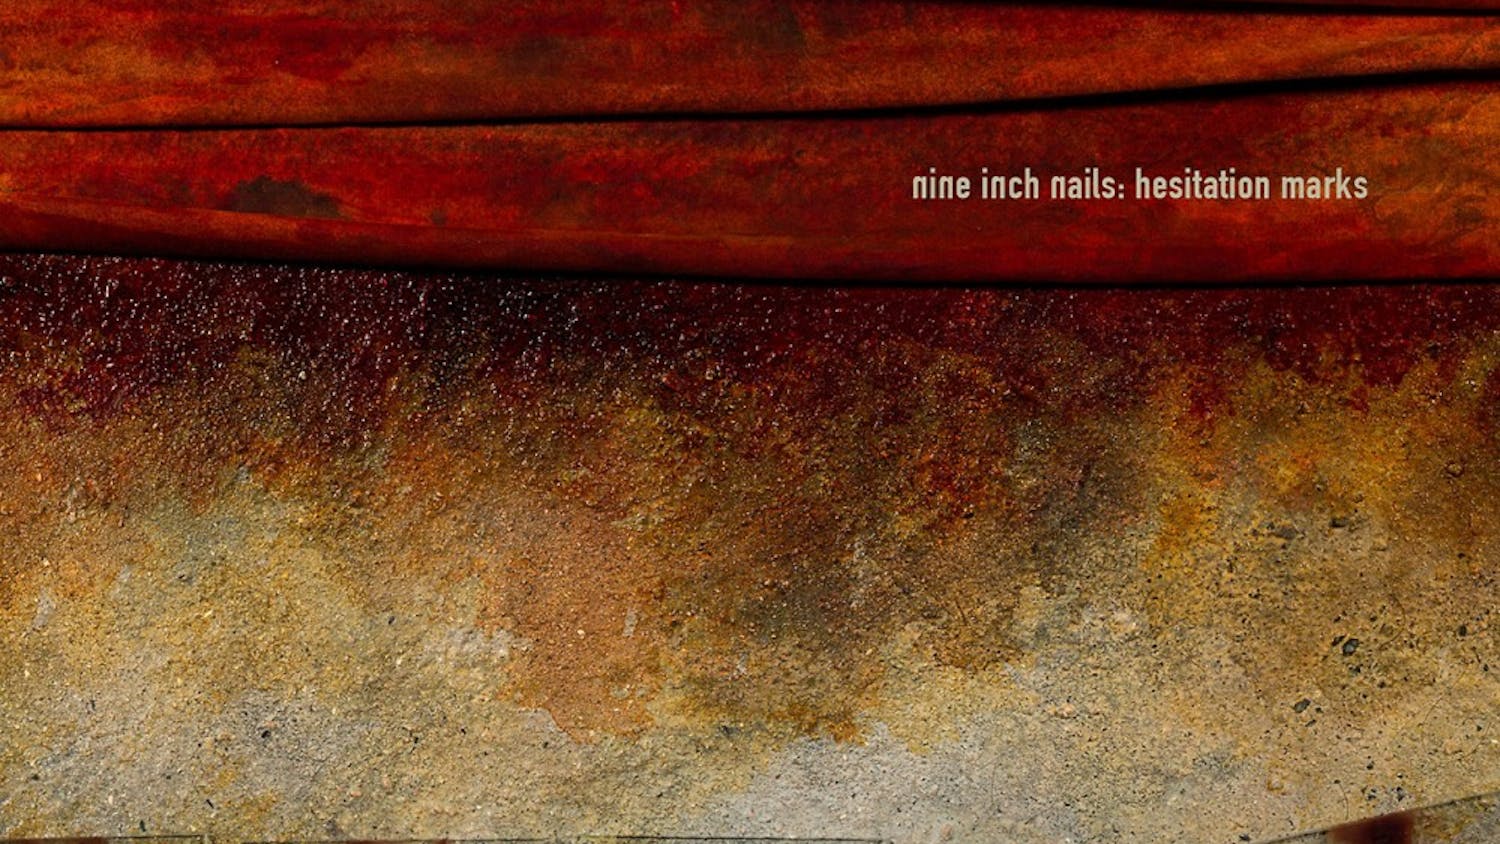 	Album cover for &#8220;Hesitation Marks,&#8221; the latest album from Nine Inch Nails. Photo Courtesy of Columbia Records.